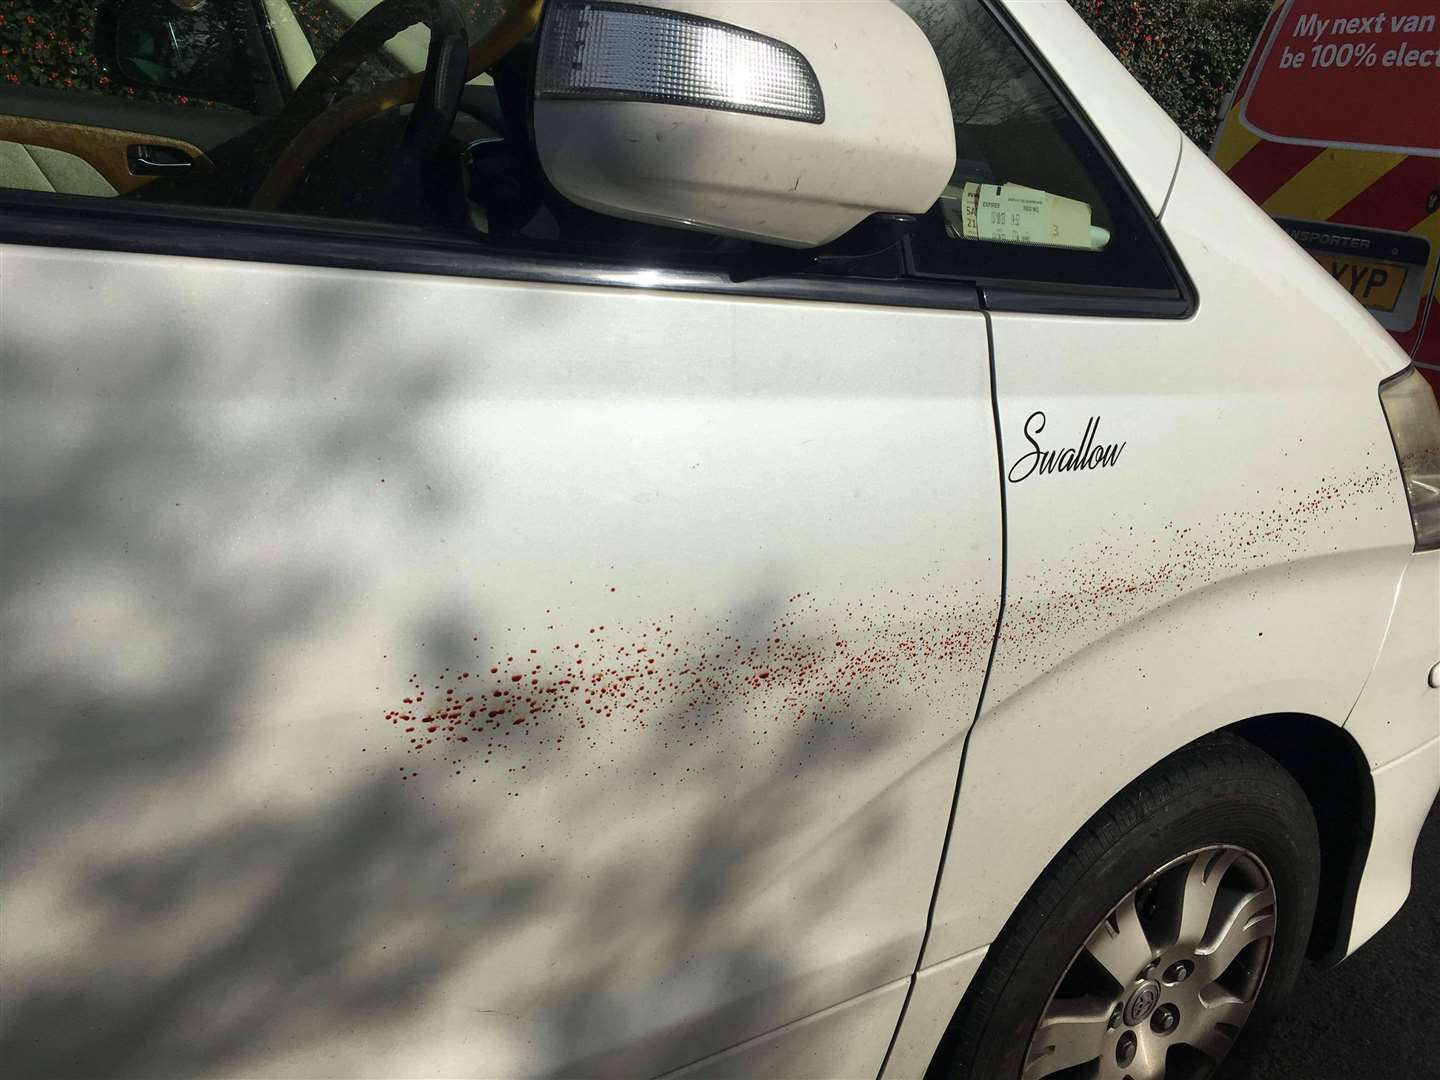 The Staple Road resident said she thinks the marks were too high on each vehicle to have been from an animal. Picture: Jane Theoff